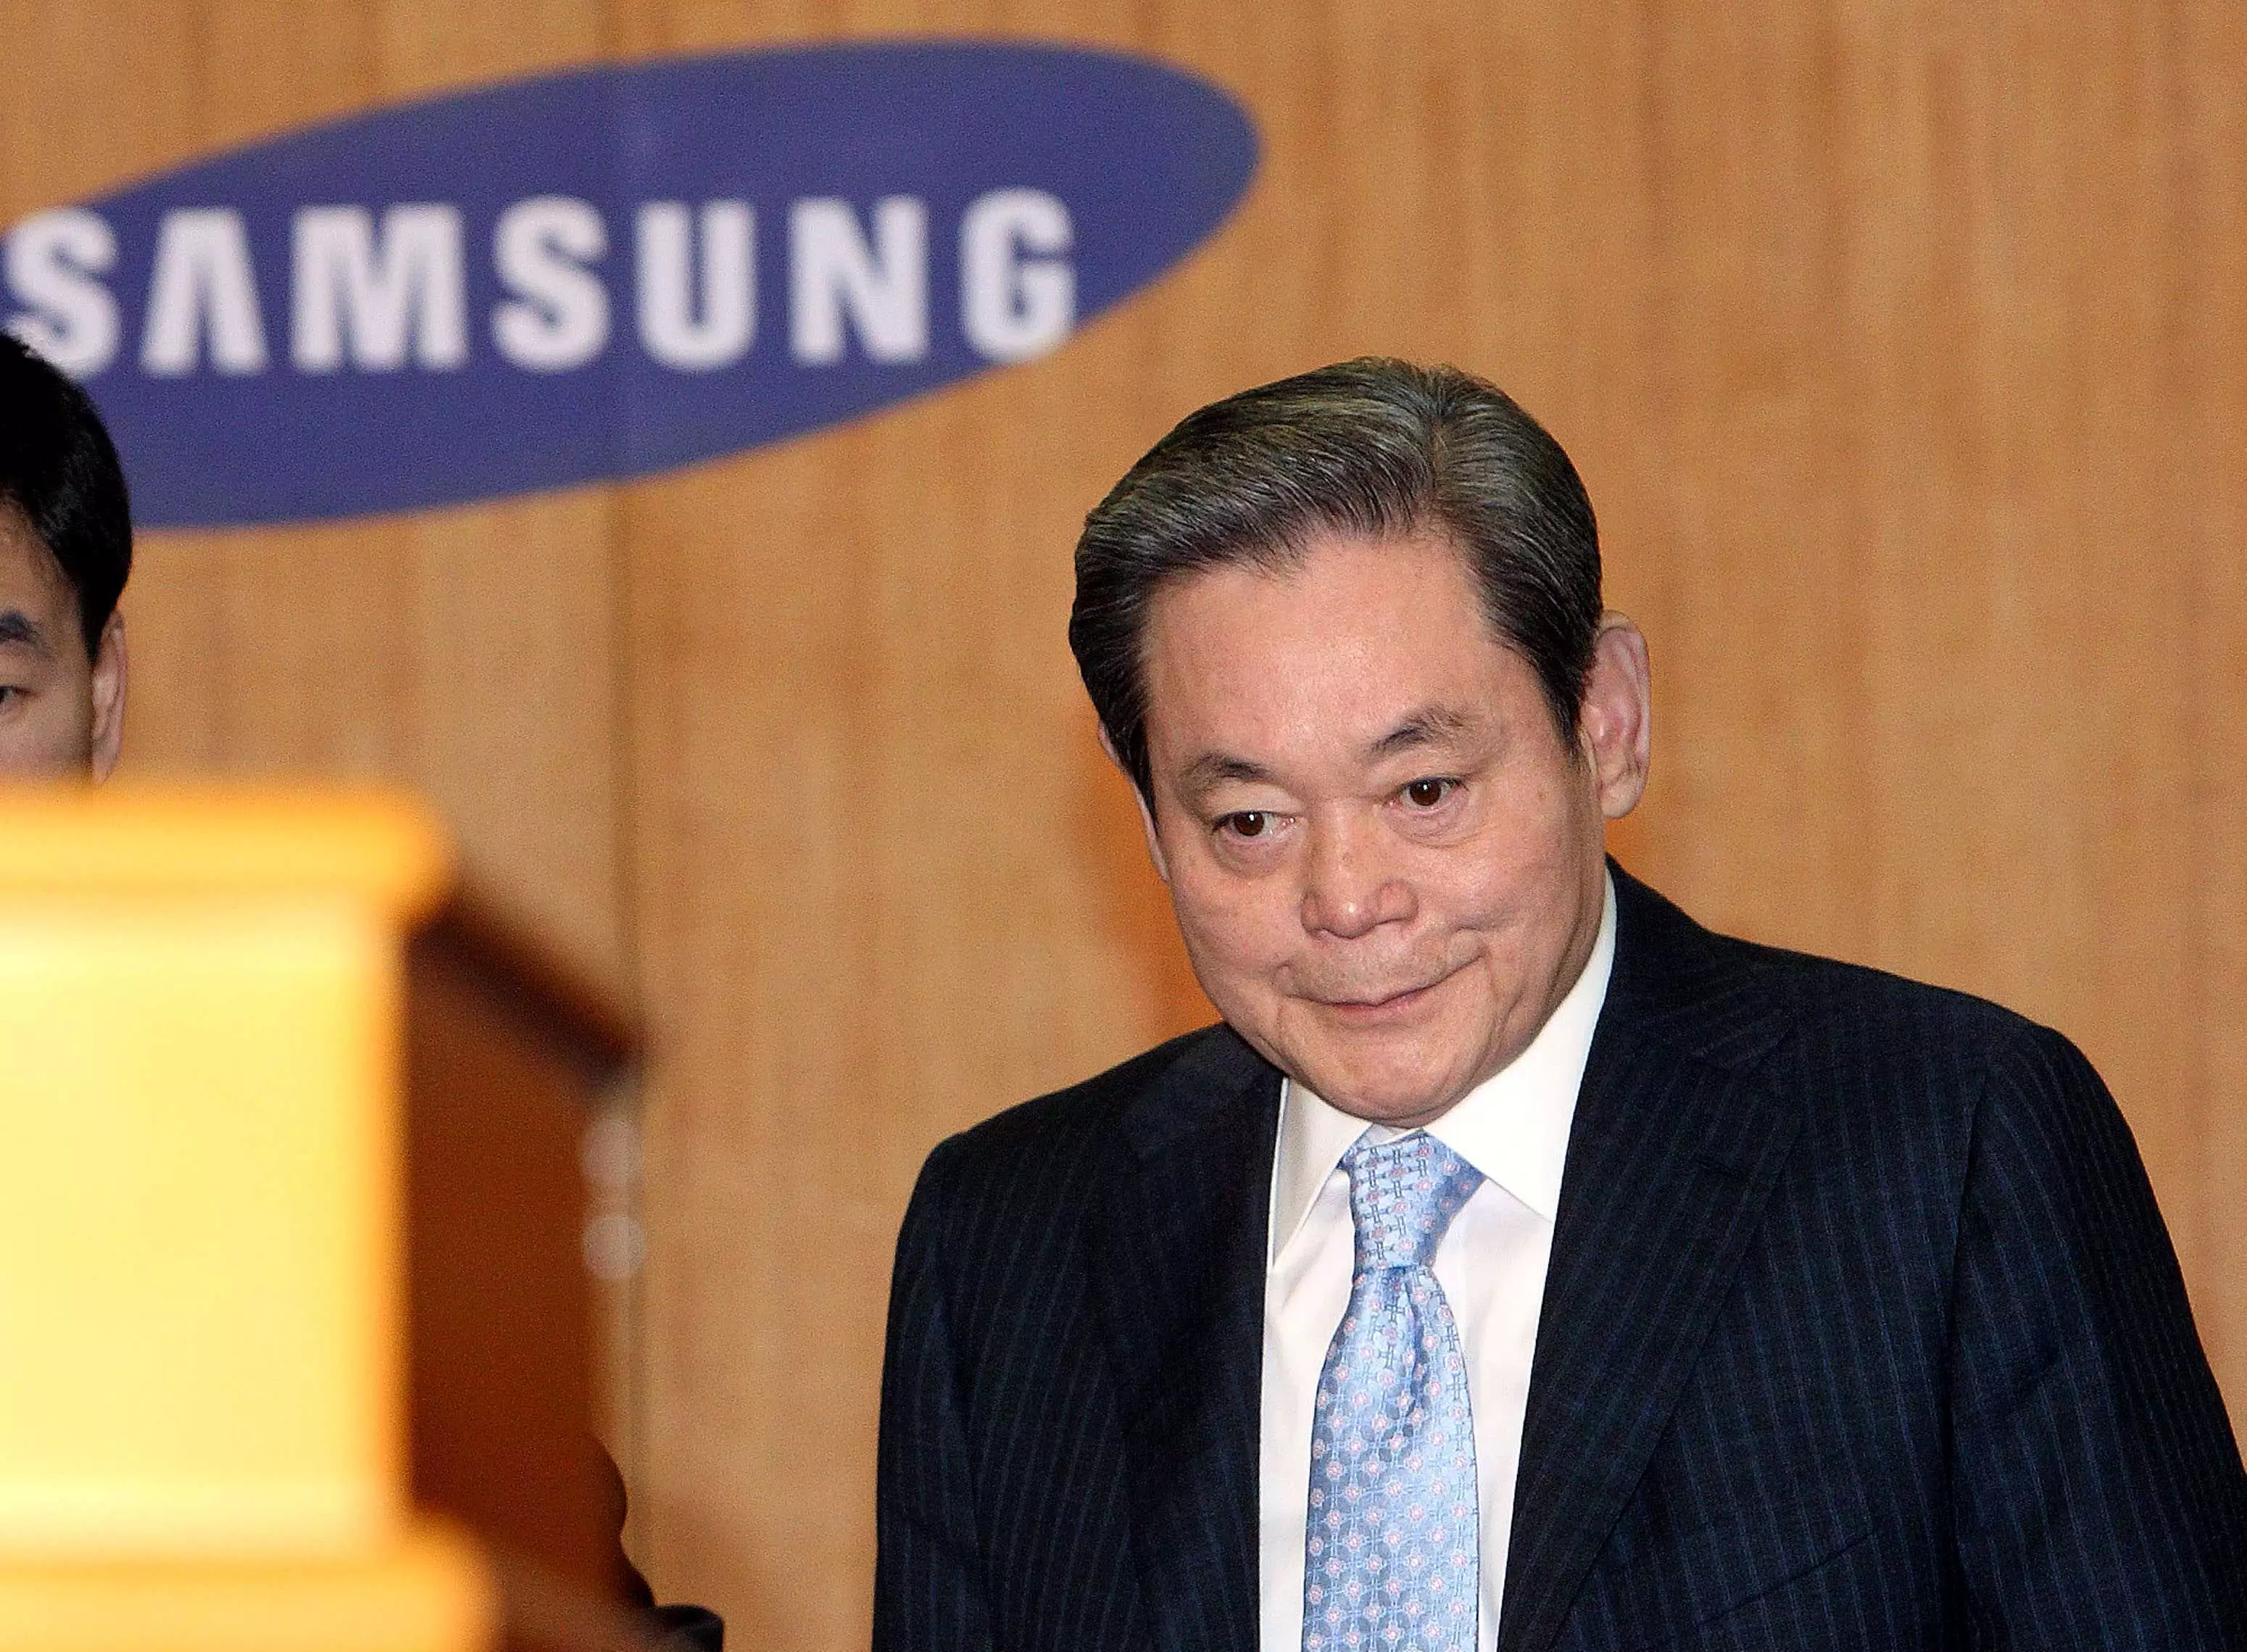 The businessman transformed Samsung into one of the biggest tech companies in the world.